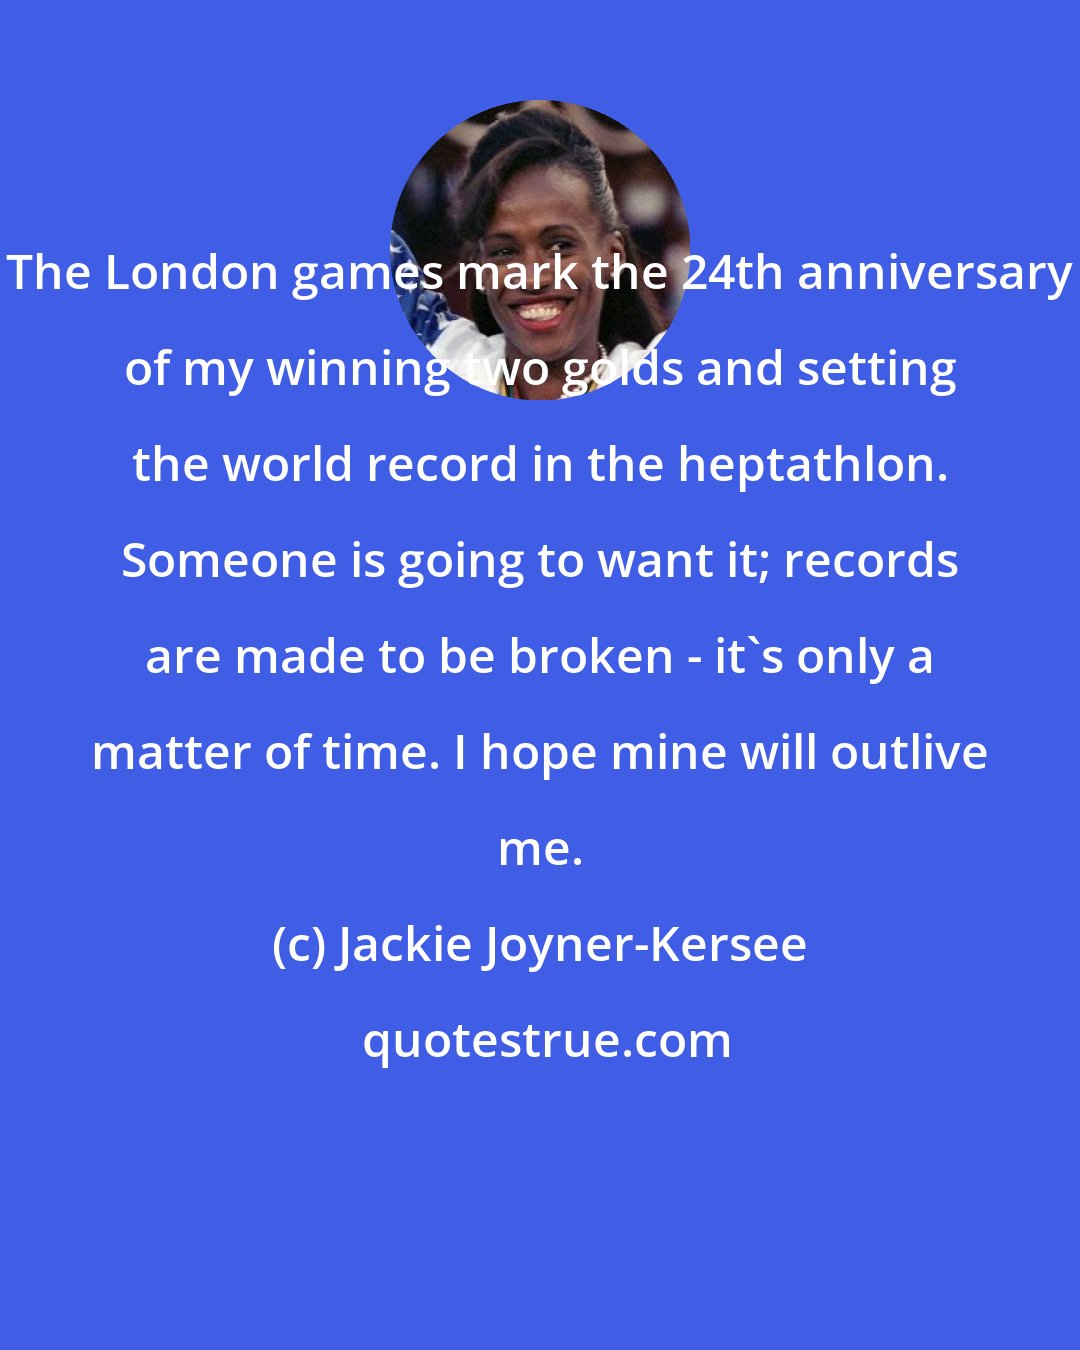 Jackie Joyner-Kersee: The London games mark the 24th anniversary of my winning two golds and setting the world record in the heptathlon. Someone is going to want it; records are made to be broken - it's only a matter of time. I hope mine will outlive me.